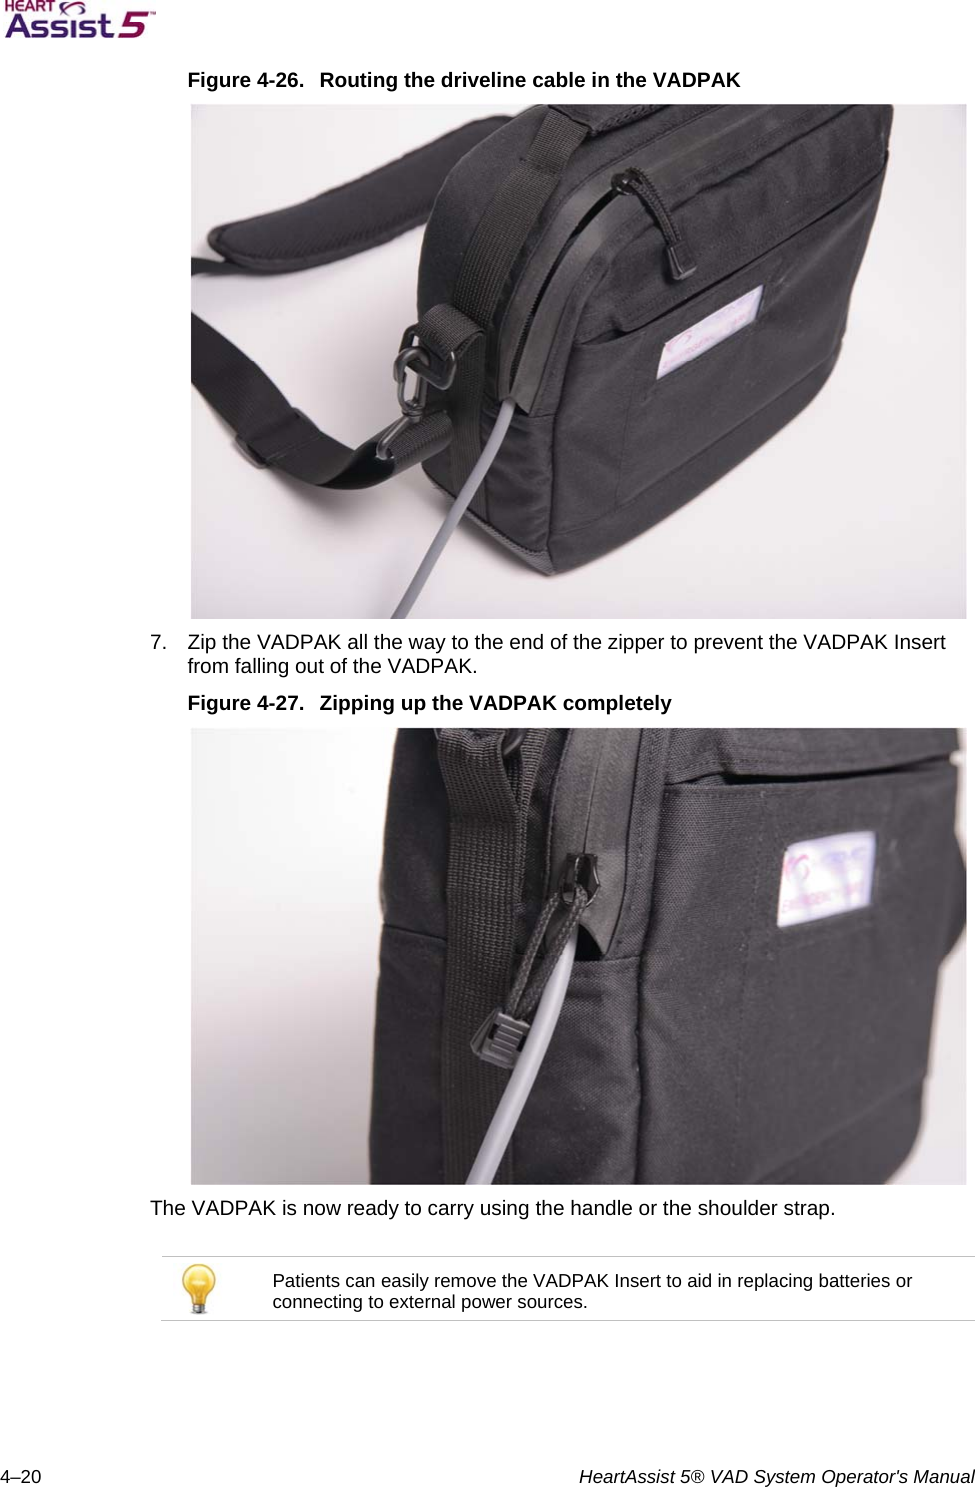   4–20  HeartAssist 5® VAD System Operator&apos;s Manual Figure 4-26.  Routing the driveline cable in the VADPAK  7.  Zip the VADPAK all the way to the end of the zipper to prevent the VADPAK Insert from falling out of the VADPAK. Figure 4-27.  Zipping up the VADPAK completely  The VADPAK is now ready to carry using the handle or the shoulder strap.   Patients can easily remove the VADPAK Insert to aid in replacing batteries or connecting to external power sources.  